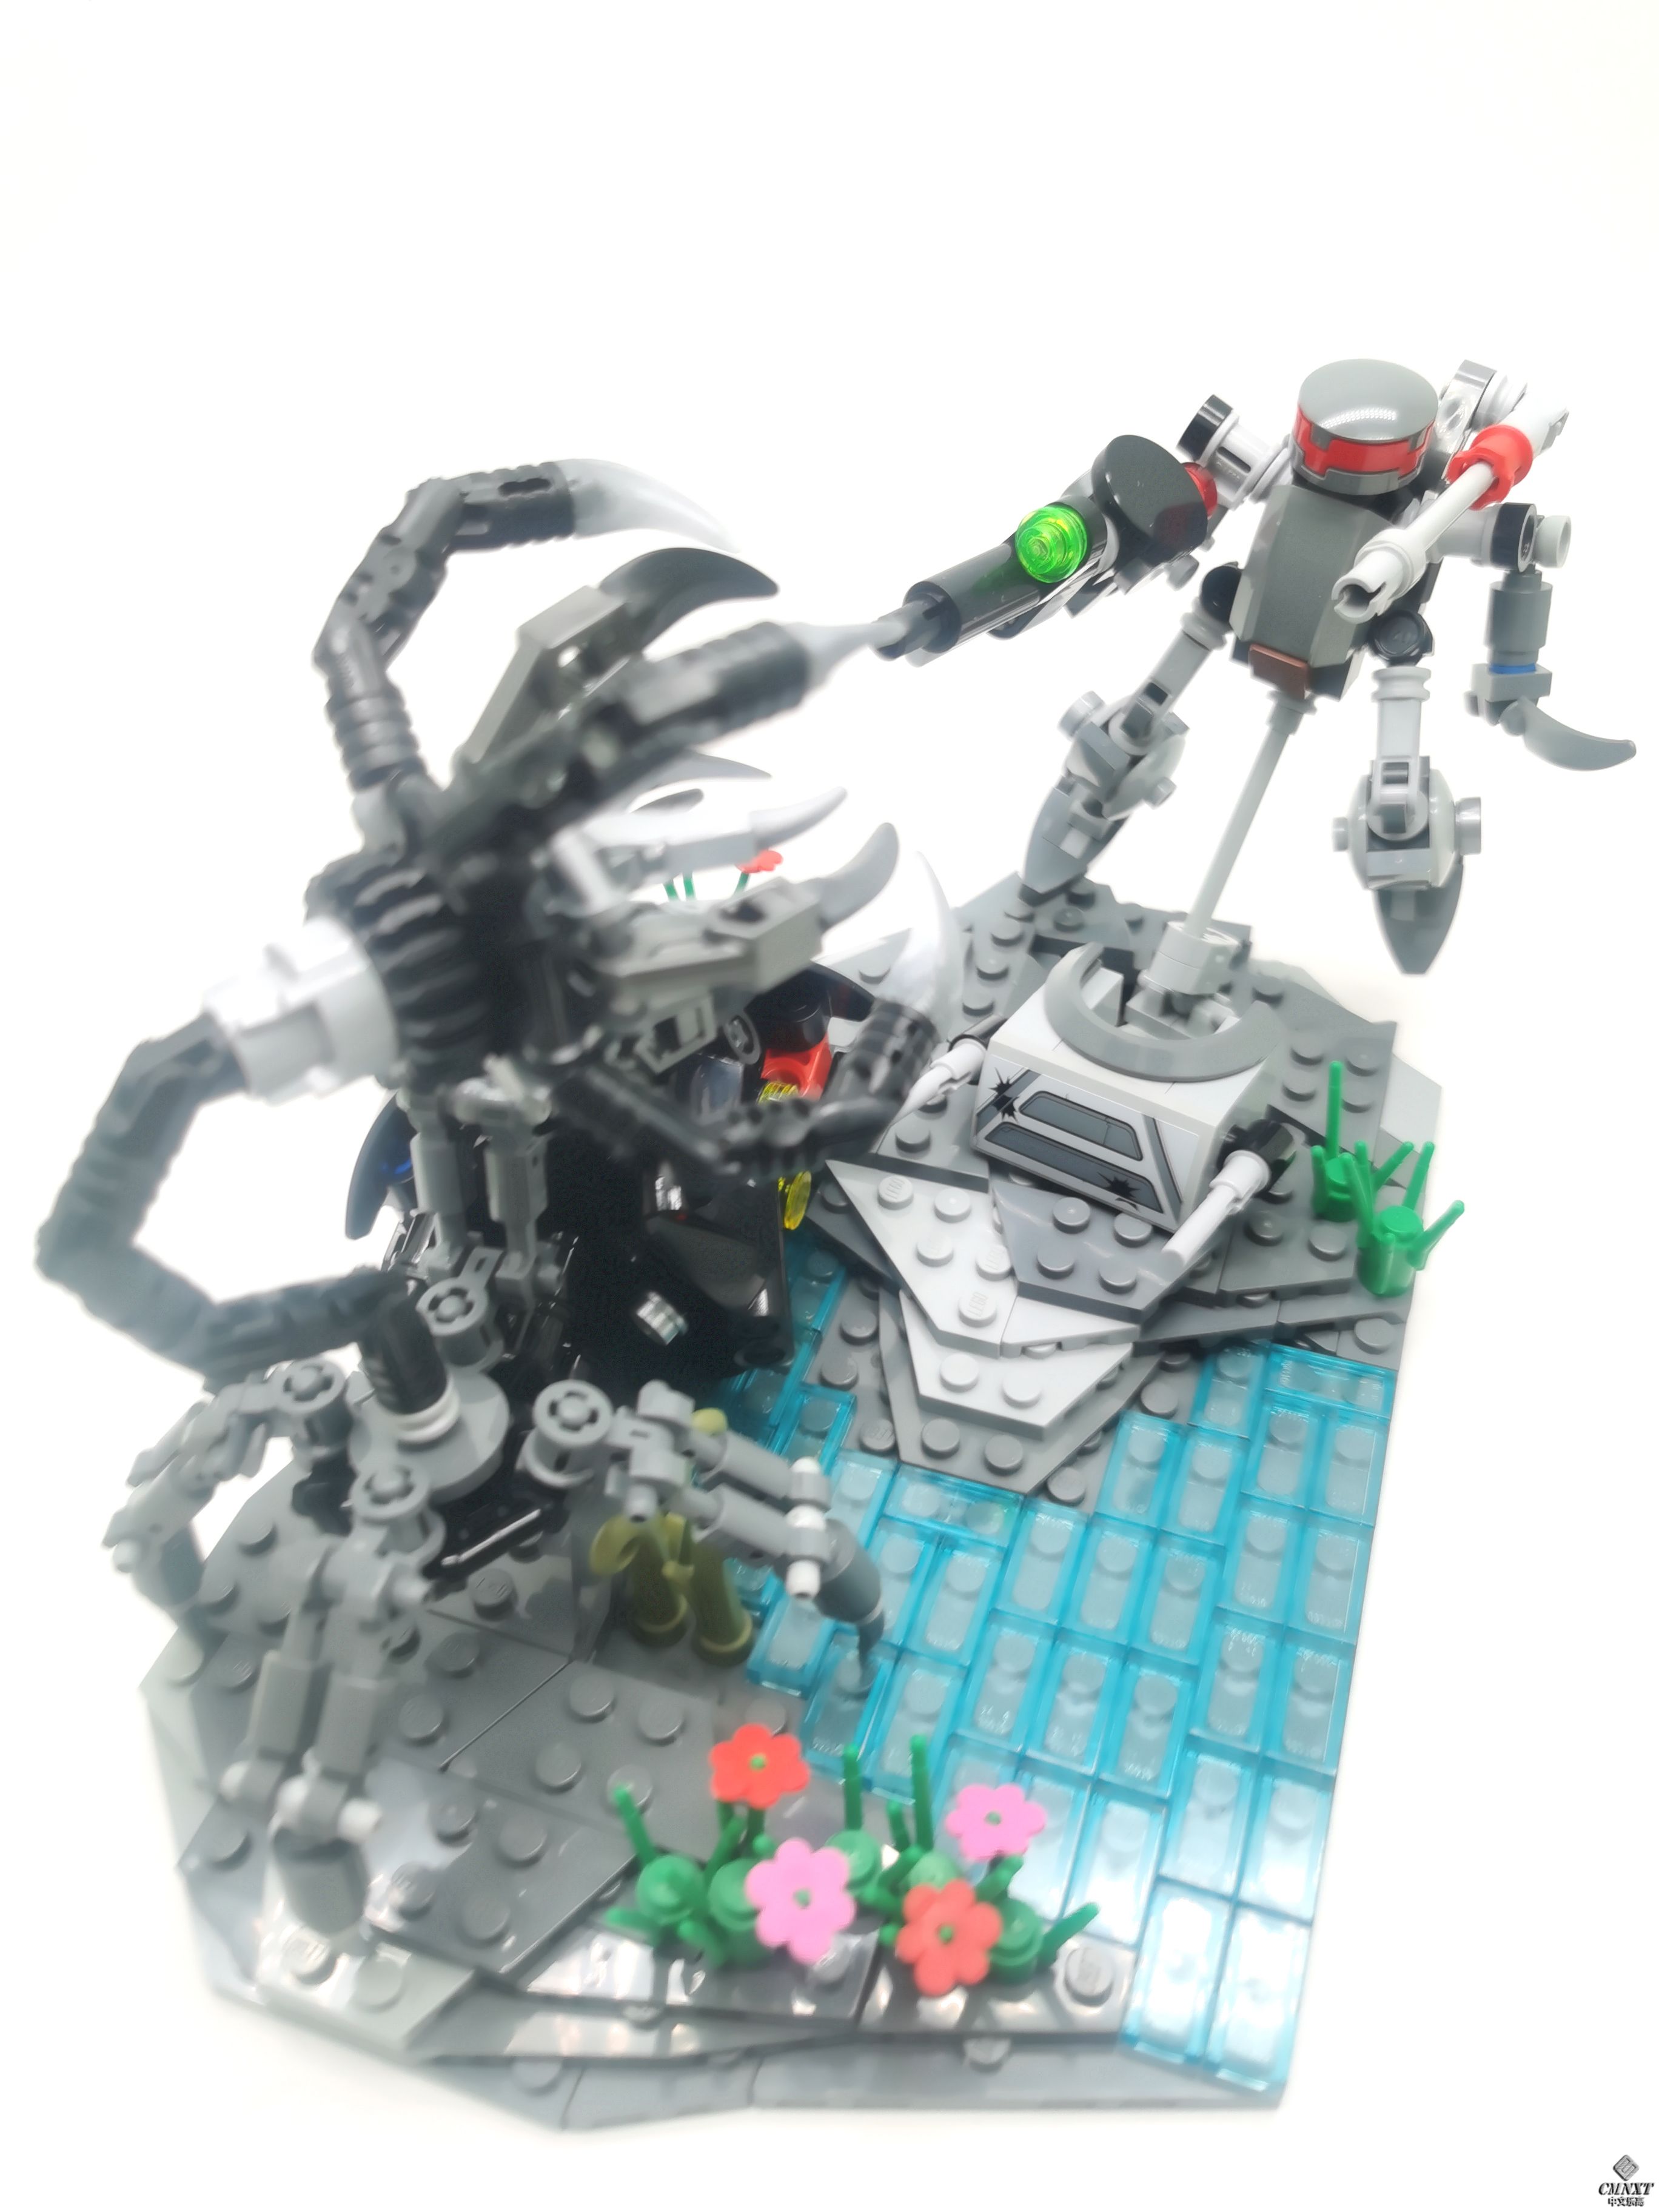 LEGO MOC 食人花的攻击 Attack of the corpse flower 09 small.jpg